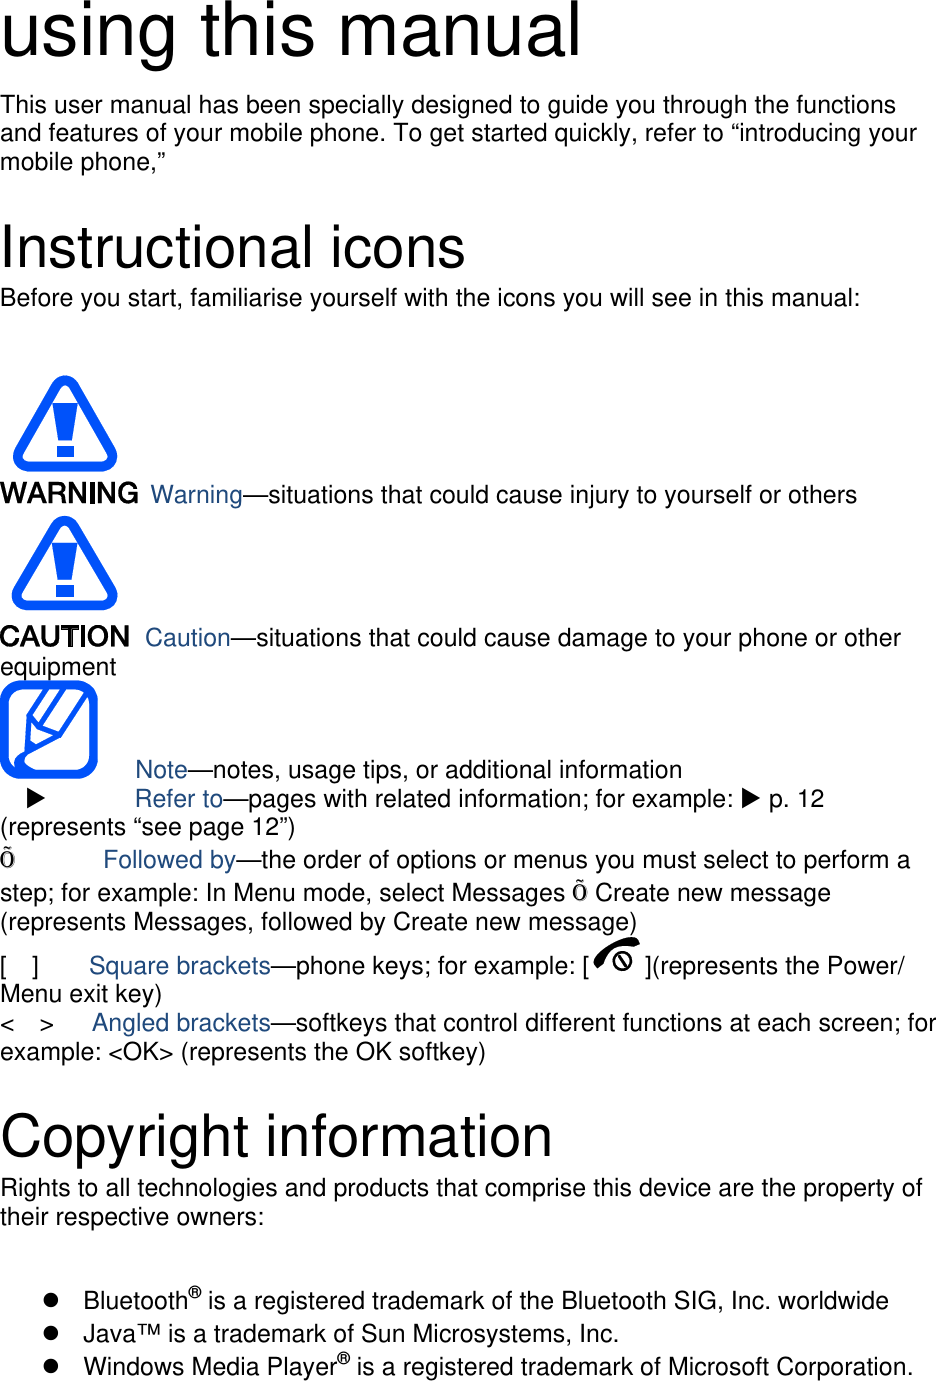 using this manual This user manual has been specially designed to guide you through the functions and features of your mobile phone. To get started quickly, refer to “introducing your mobile phone,”    Instructional icons Before you start, familiarise yourself with the icons you will see in this manual:     Warning—situations that could cause injury to yourself or others  Caution—situations that could cause damage to your phone or other equipment    Note—notes, usage tips, or additional information          Refer to—pages with related information; for example:  p. 12 (represents “see page 12”) Õ       Followed by—the order of options or menus you must select to perform a step; for example: In Menu mode, select Messages Õ Create new message (represents Messages, followed by Create new message) [  ]    Square brackets—phone keys; for example: [ ](represents the Power/ Menu exit key) &lt;  &gt;   Angled brackets—softkeys that control different functions at each screen; for example: &lt;OK&gt; (represents the OK softkey)  Copyright information Rights to all technologies and products that comprise this device are the property of their respective owners:   Bluetooth® is a registered trademark of the Bluetooth SIG, Inc. worldwide   Java™ is a trademark of Sun Microsystems, Inc.  Windows Media Player® is a registered trademark of Microsoft Corporation. 